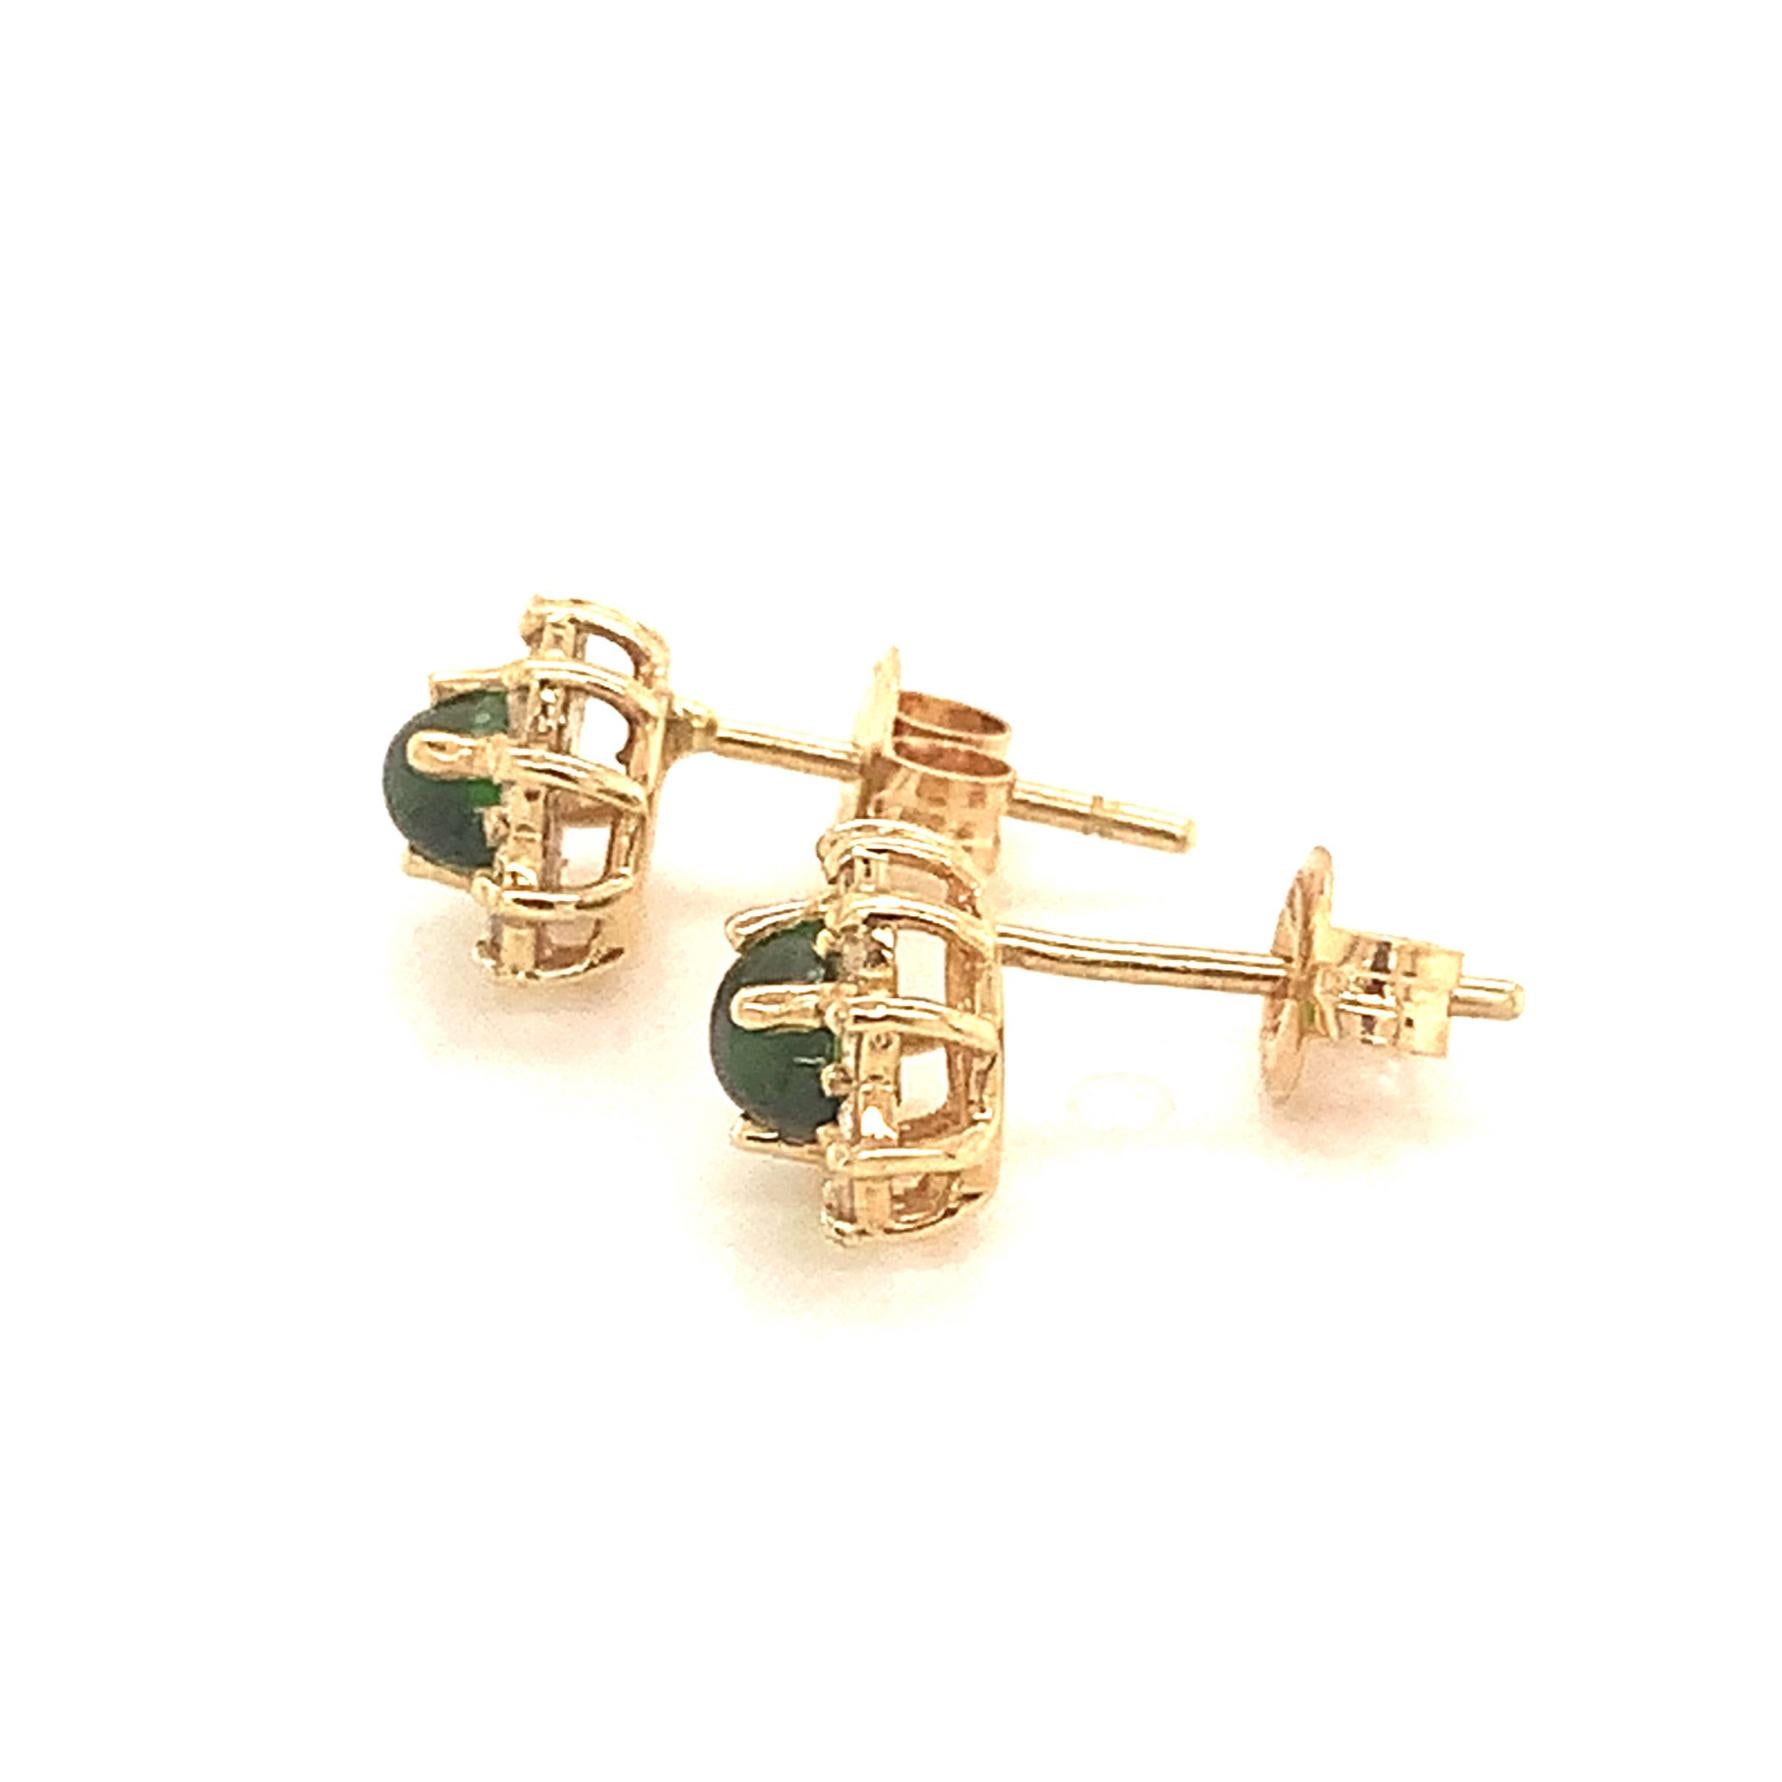 Natural Finely Faceted Quality Tourmaline Diamond Earrings 14k Gold 0.85 TCW Certified $1,250 113472

Please look at the video attached for this item. With the video you can see the movement of the item and appreciate the faceting and details